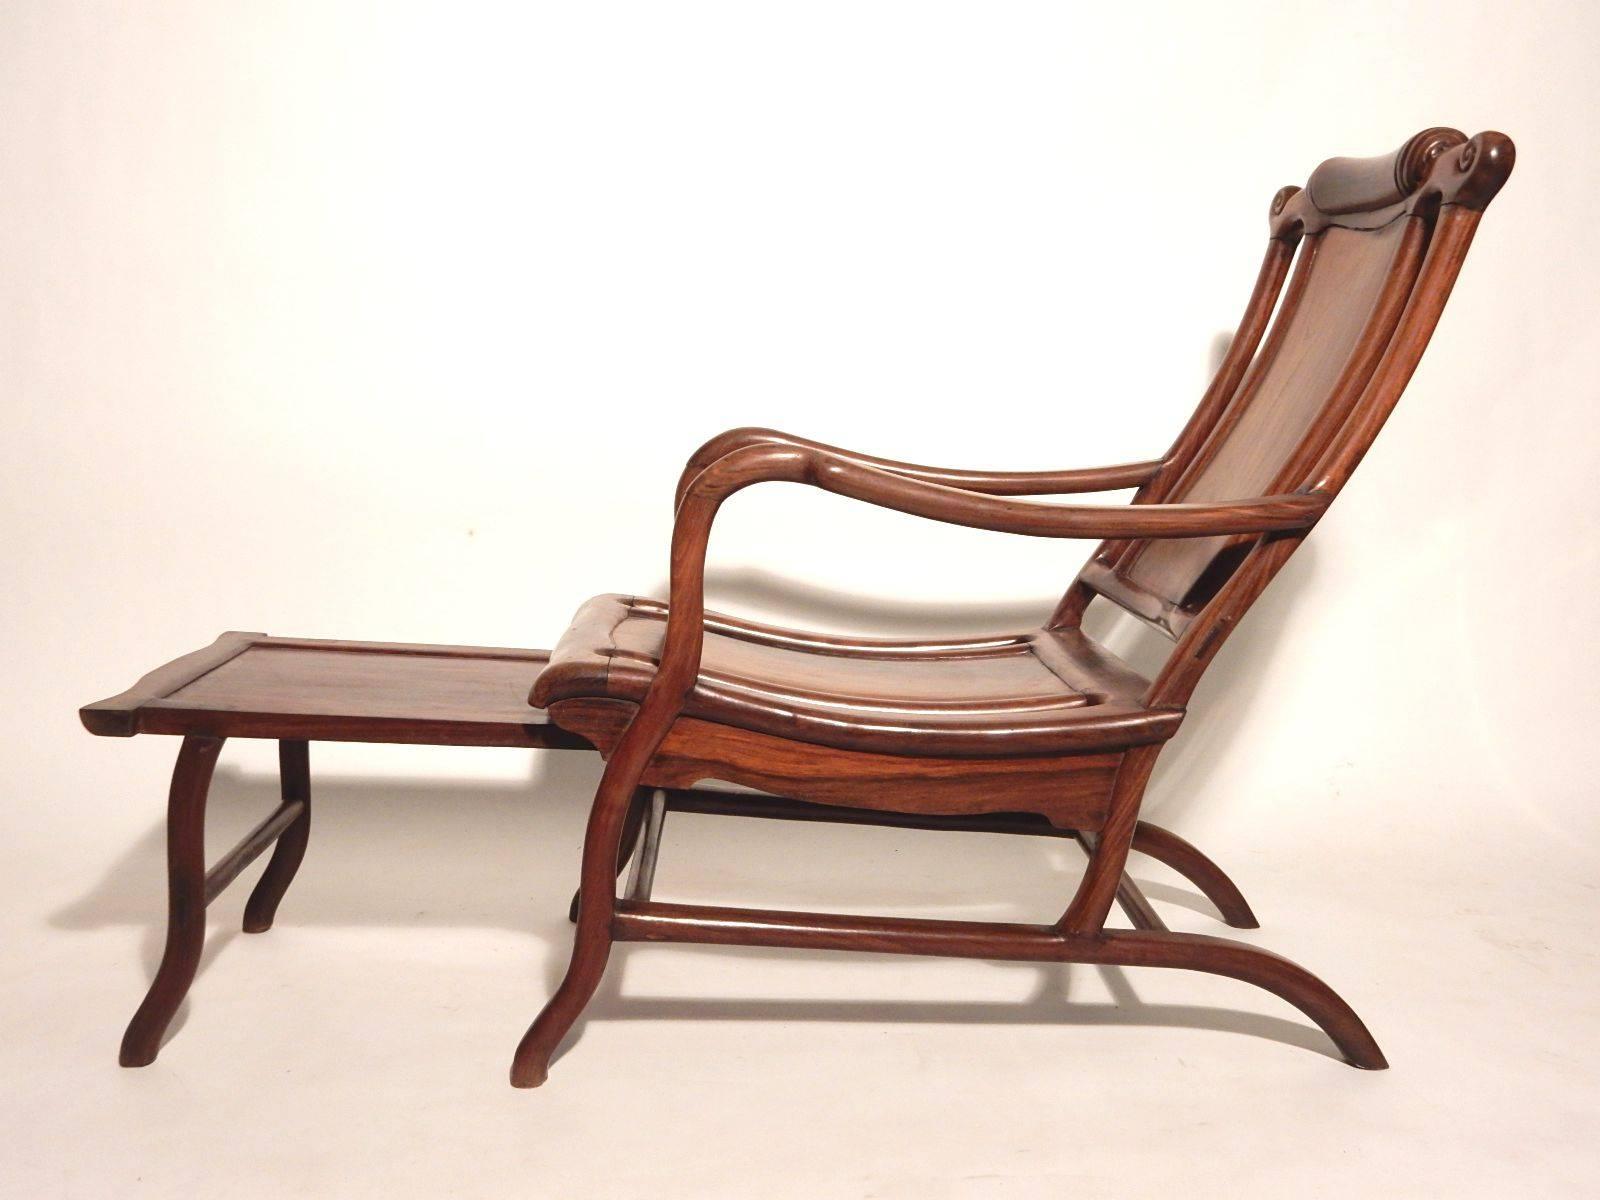 Late 19th century Chinese "Moon Gazing" lounge chair sculpted of solid teak.
Leg extension slides out for a full laid back experience.
Solid chair with no loose joints or movement.
Measures 52" long/deep when open, 32" closed.